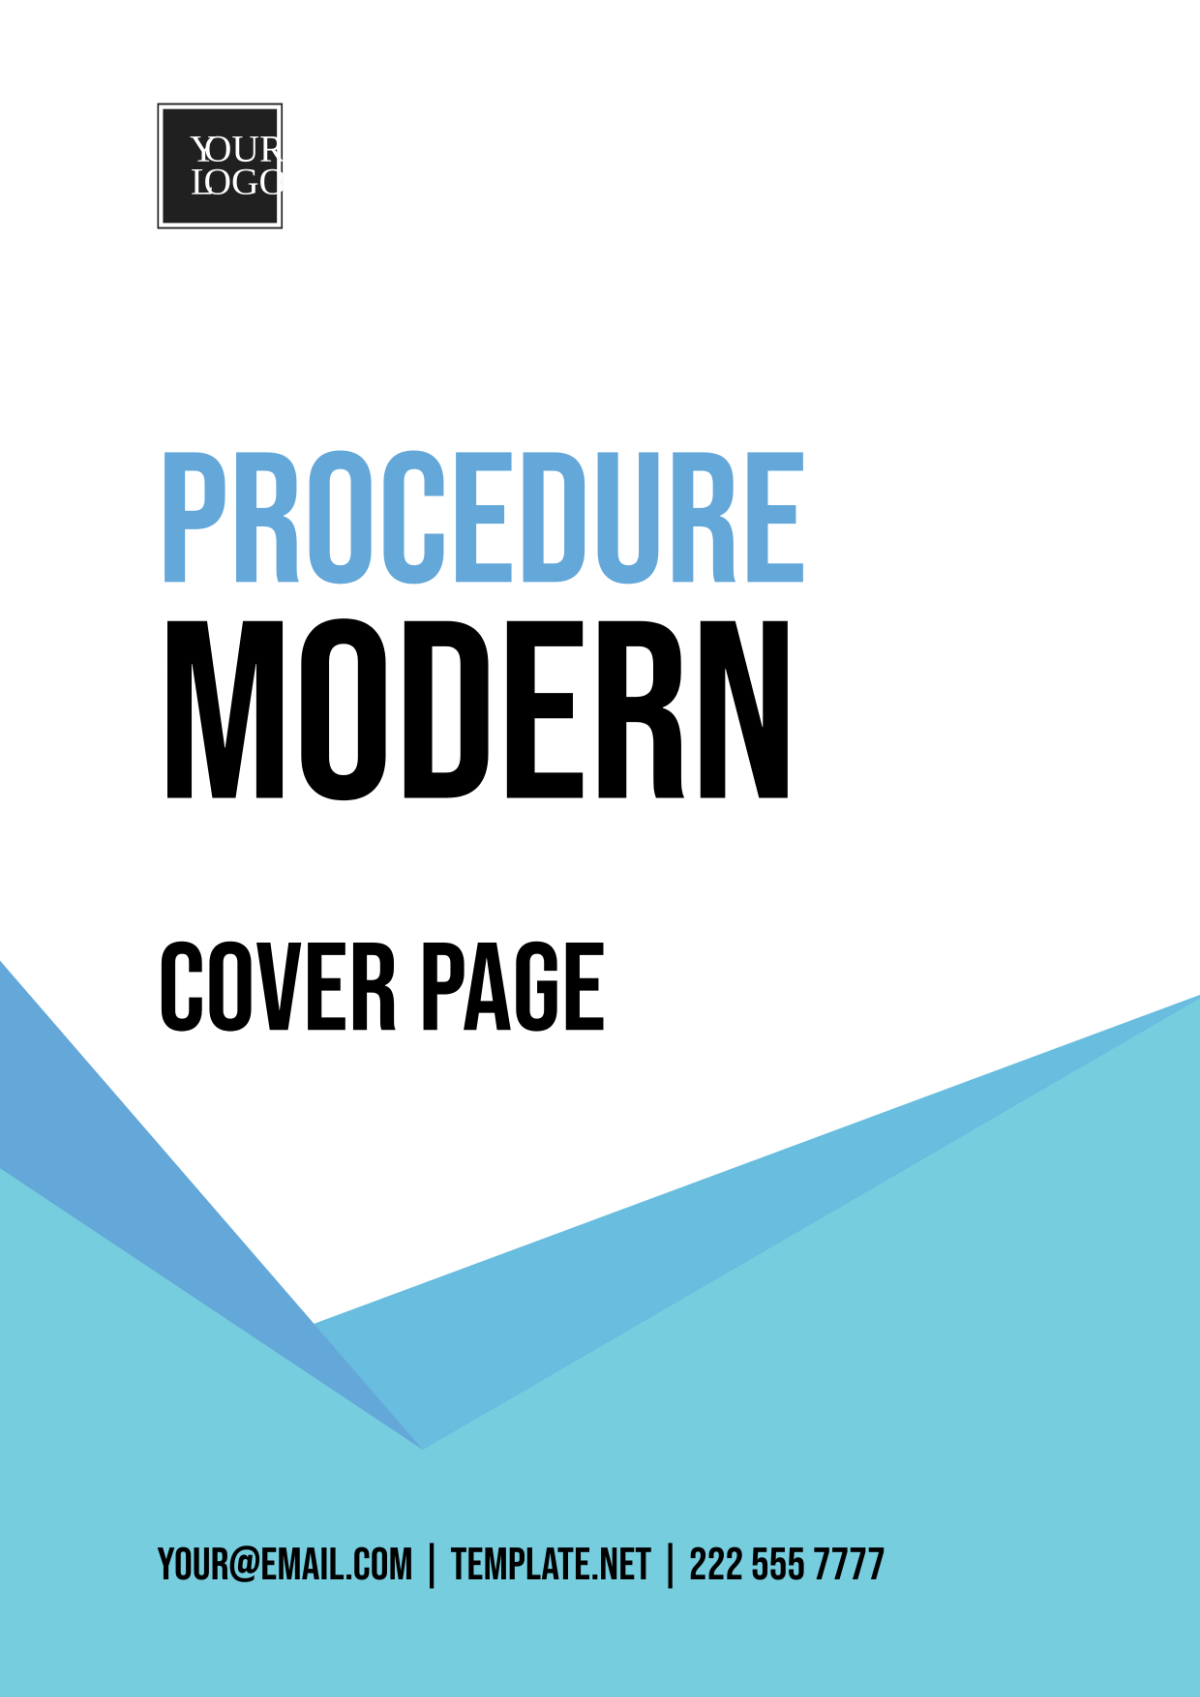 Free Procedure Modern Cover Page Template